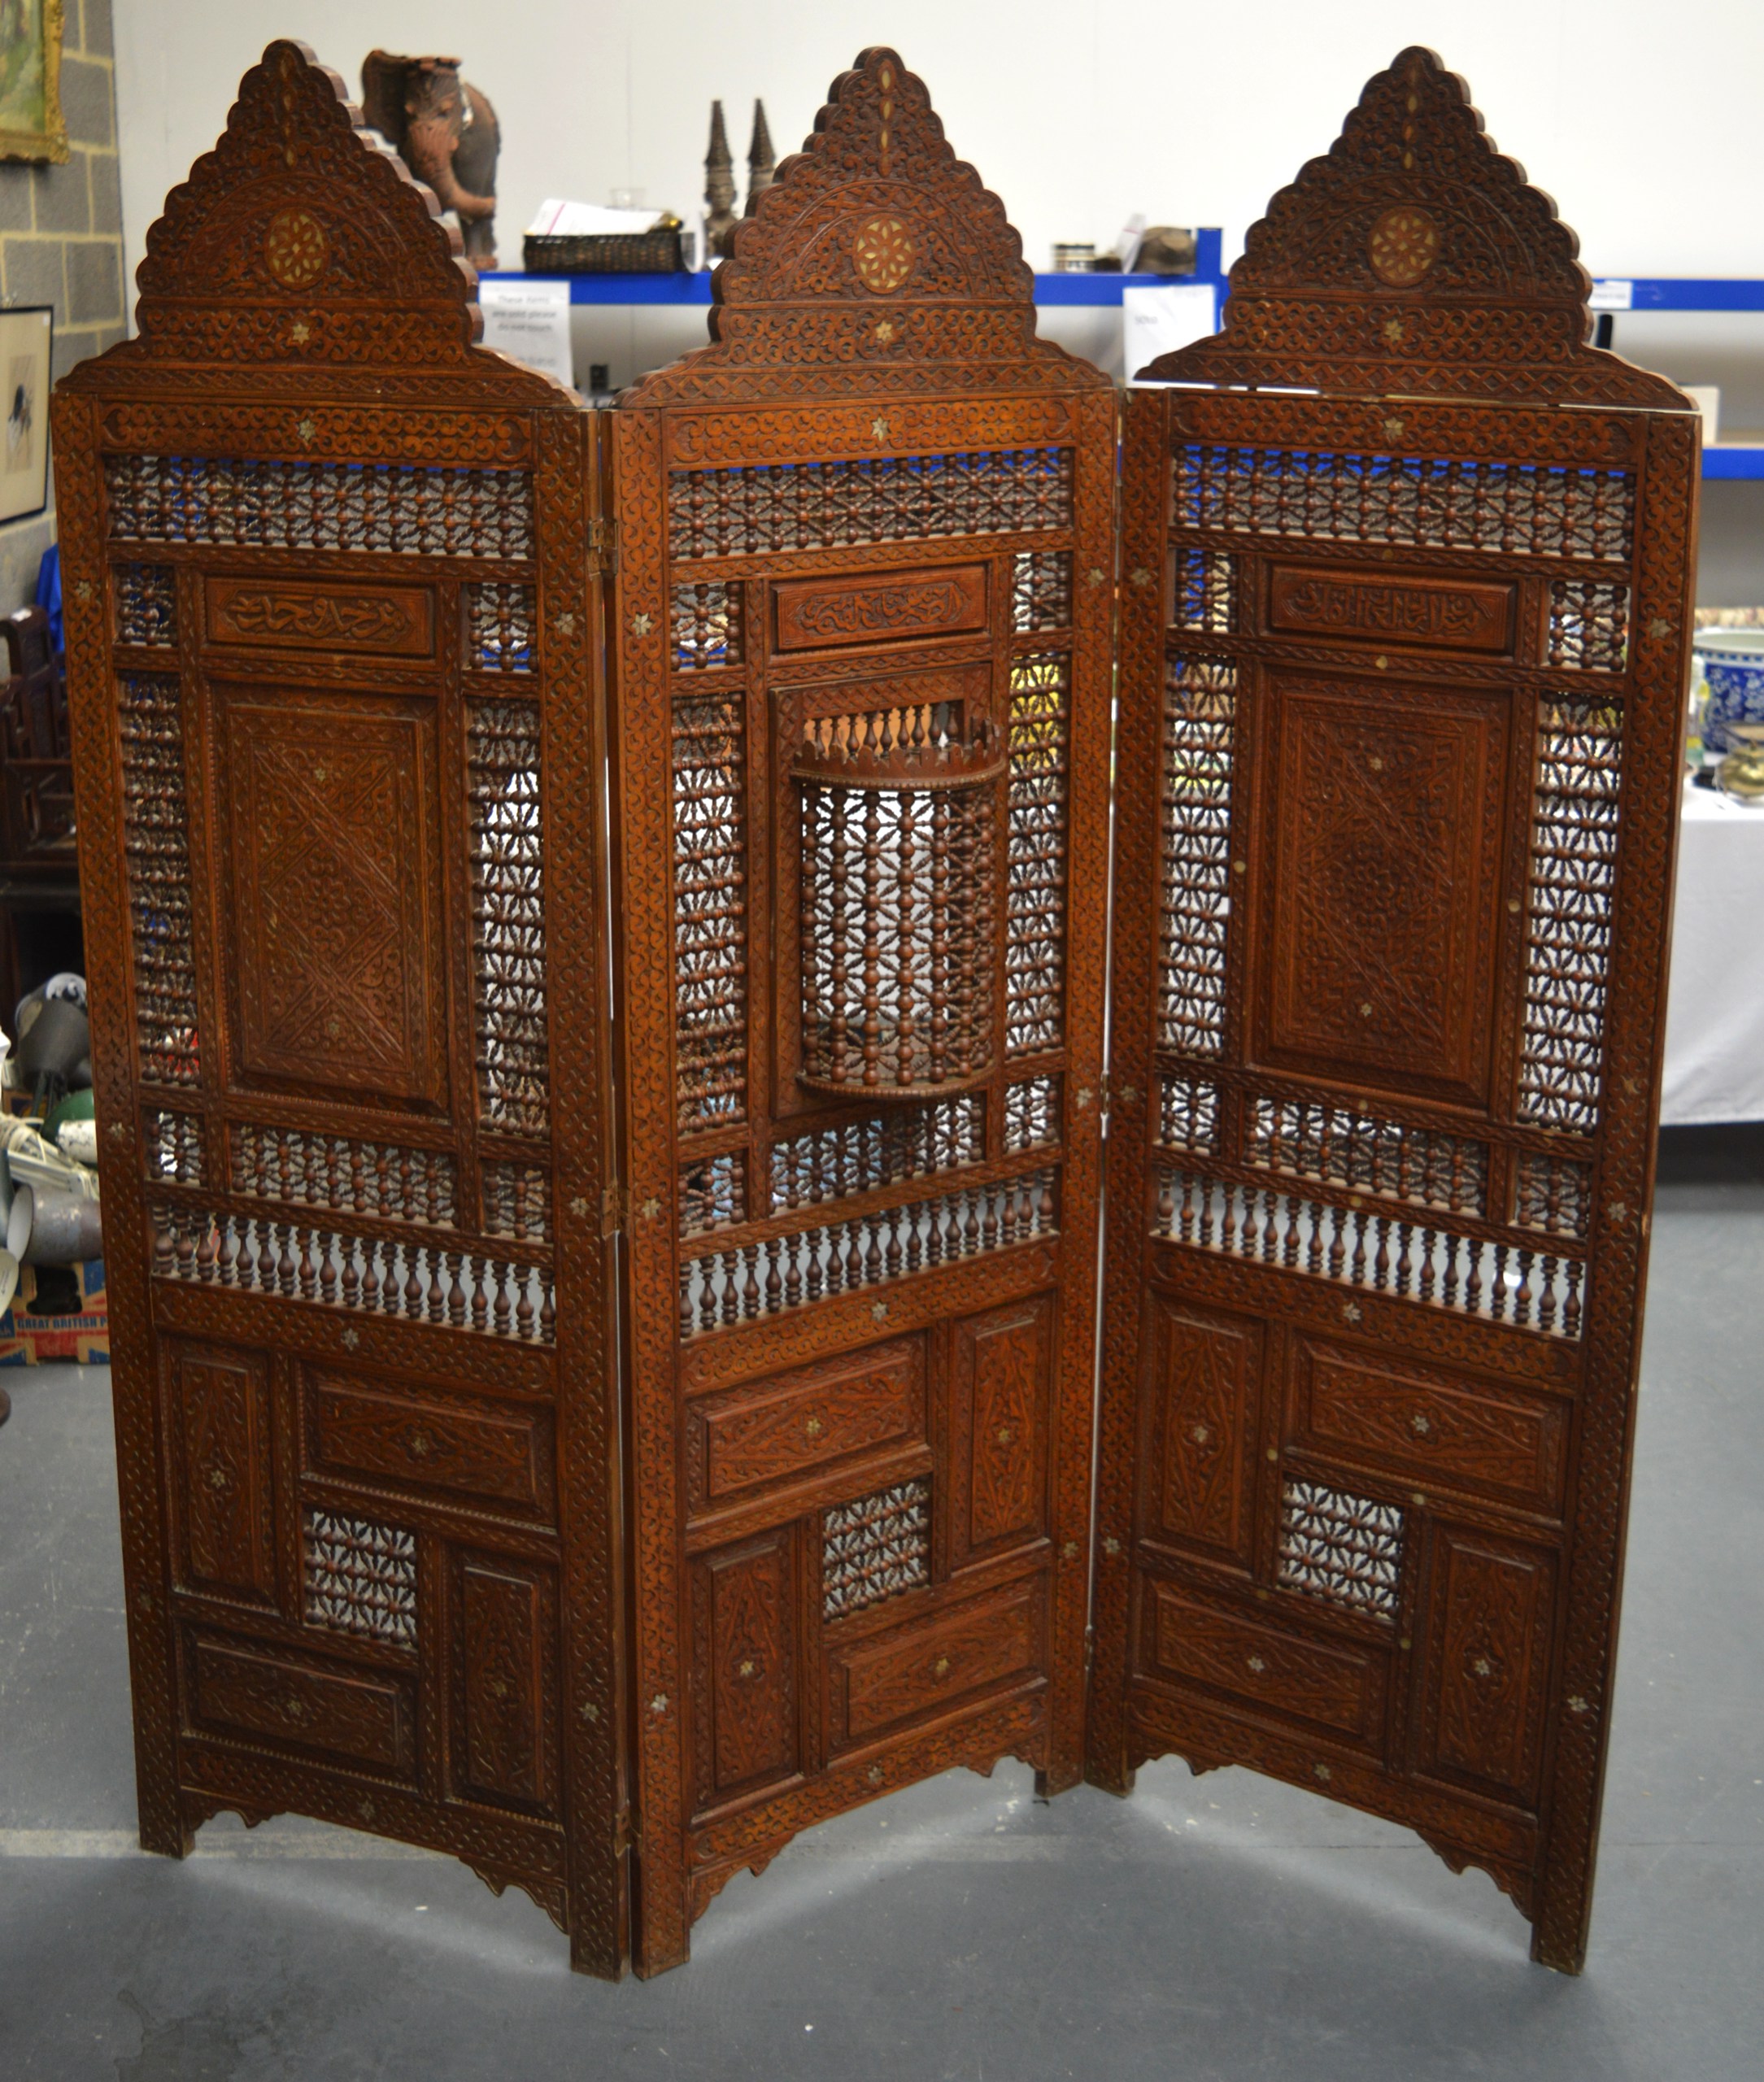 A VERY LARGE LIBERTY'S ISLAMIC INSPIRED WOODEN SCREEN decorated with calligraphy and mother of pearl